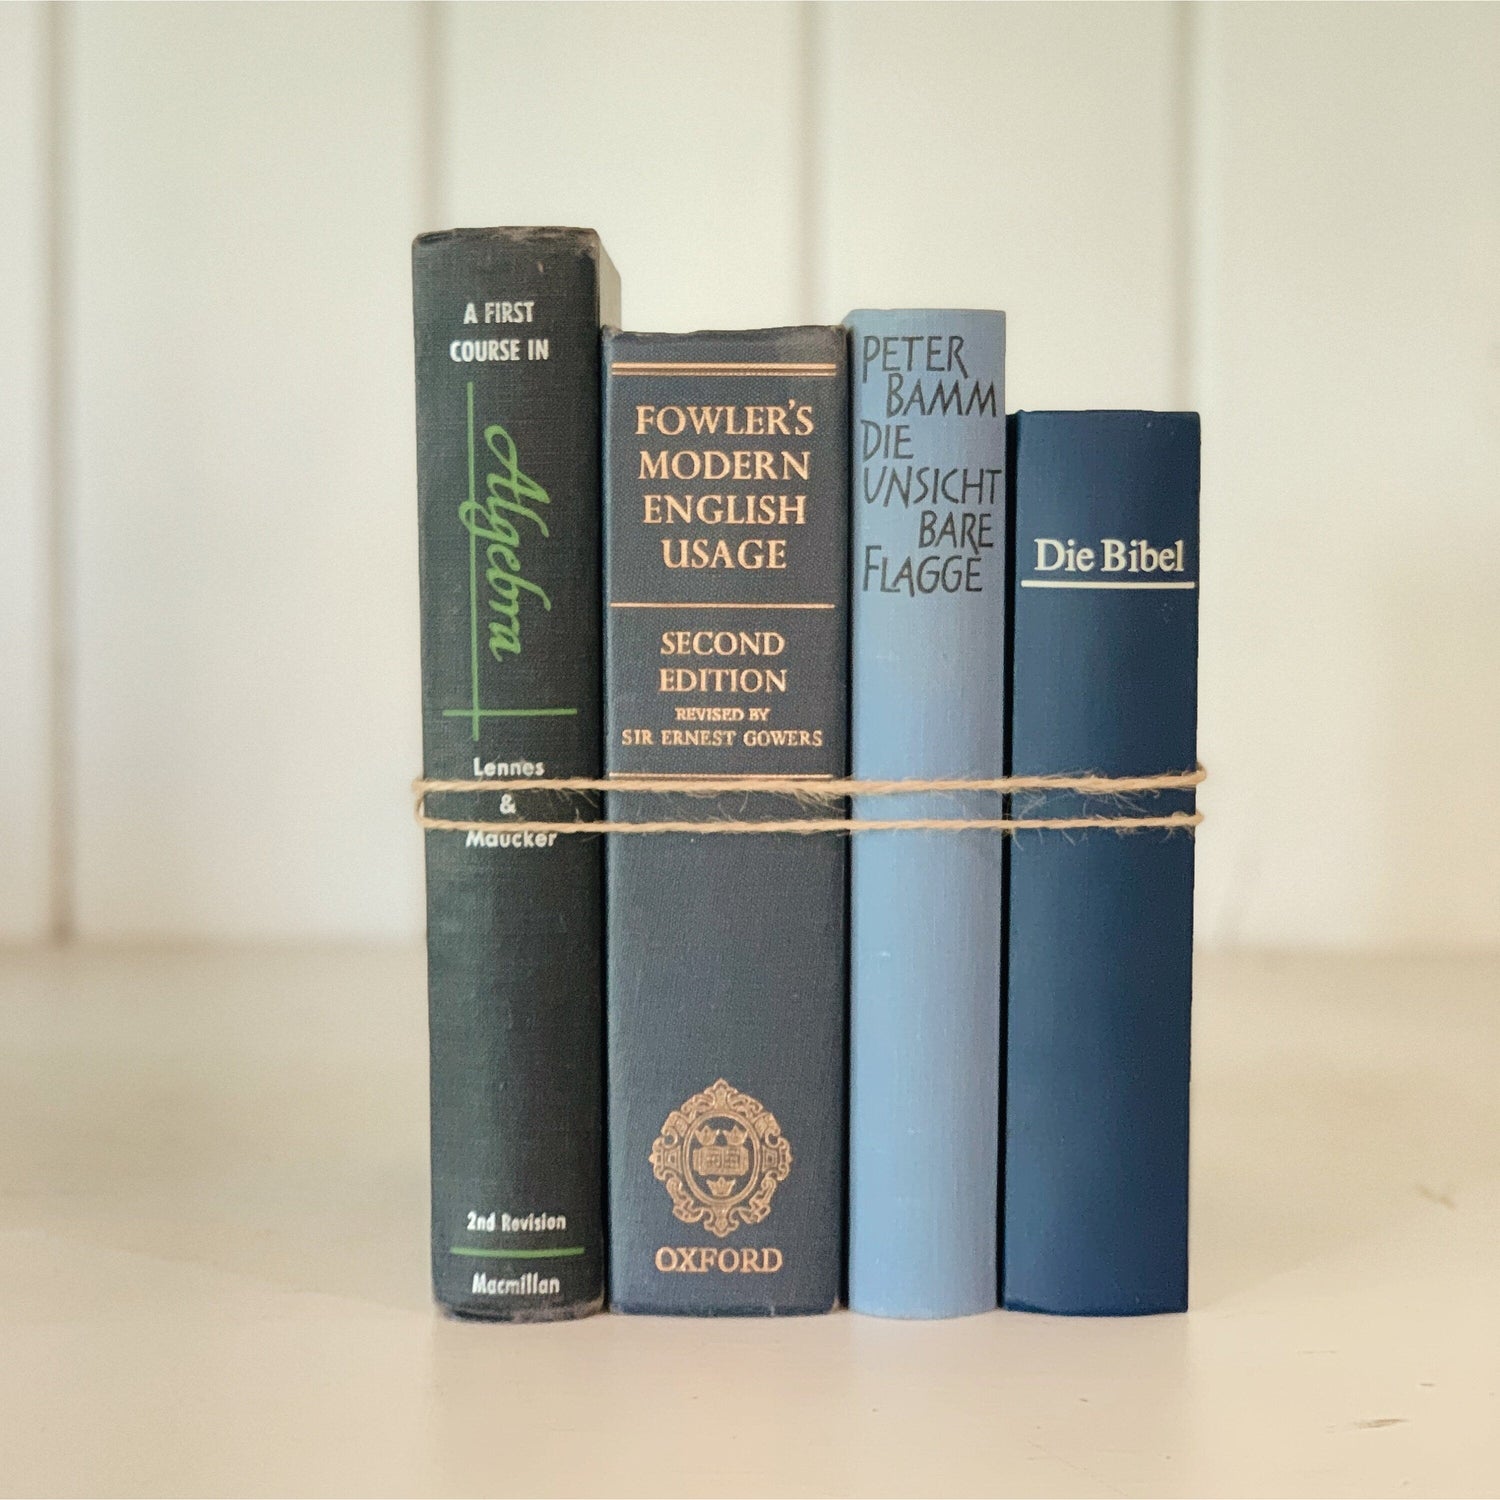 Blue Antique and Vintage Decorative Books for Display, Shabby Book Bundle, Nightstand Decor